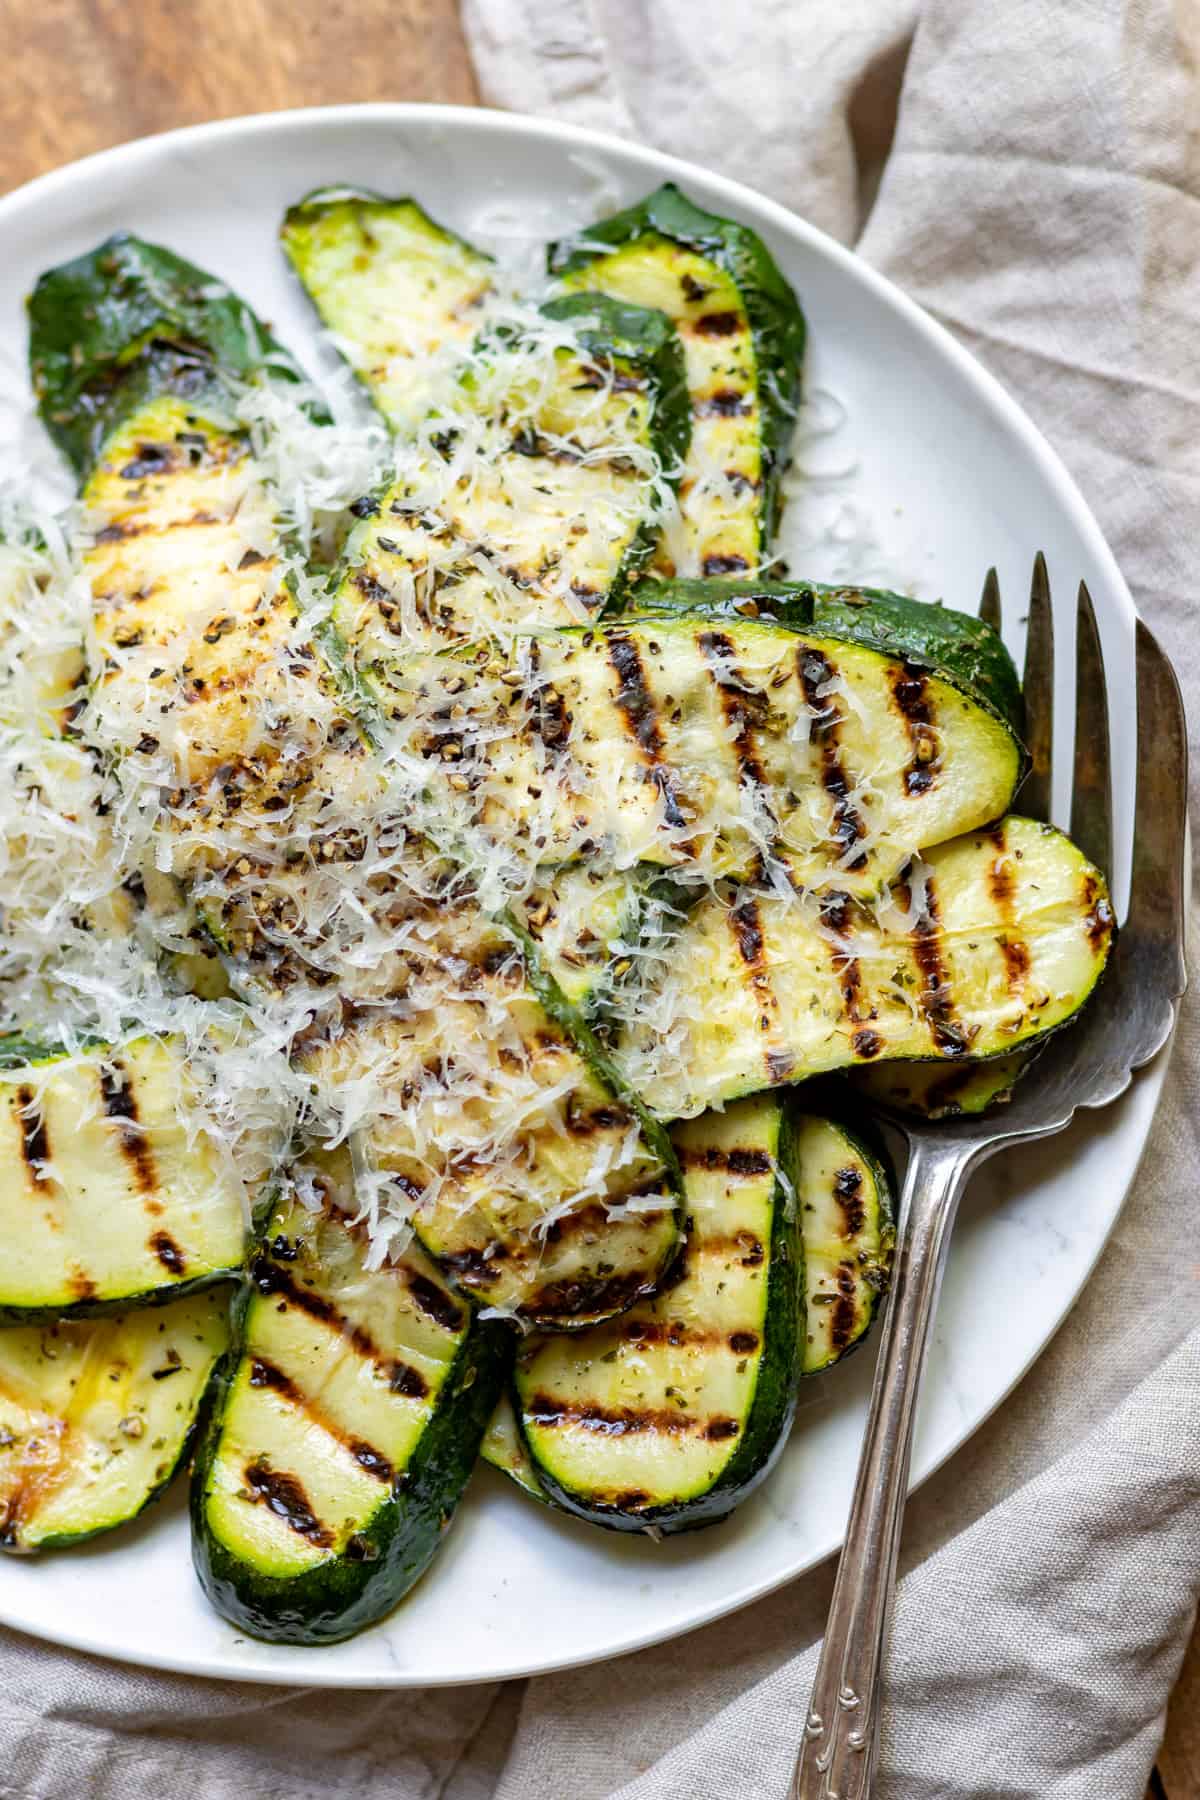 Serving dish of grilled zucchini topped with parmesan cheese.